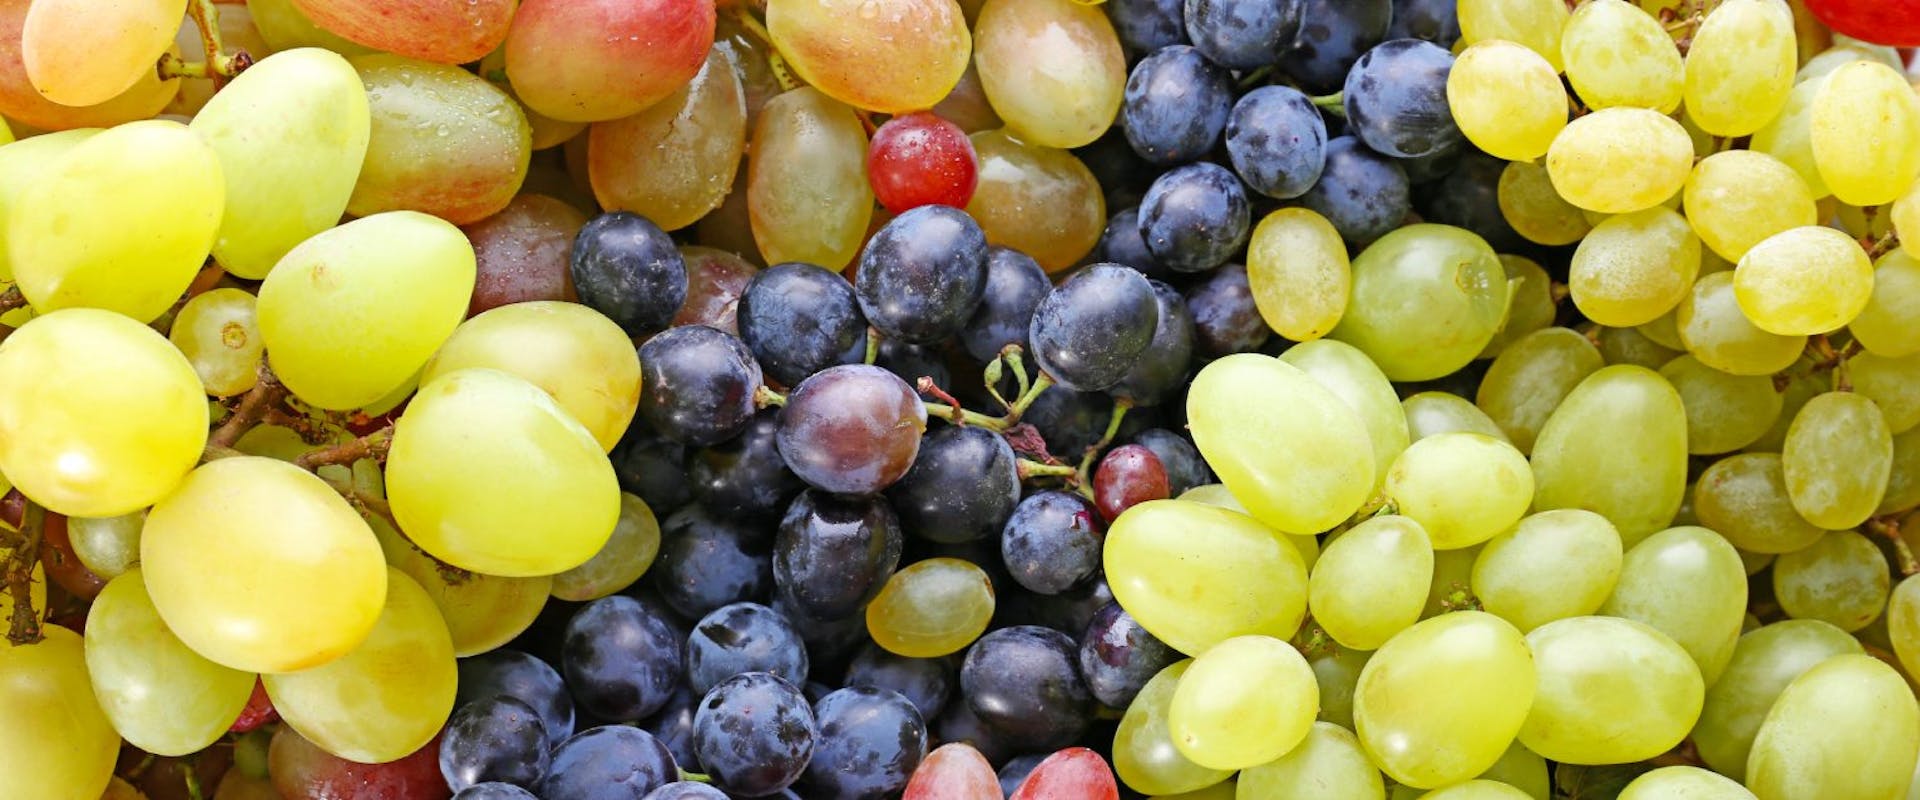 A selection of grapes from a grape vine.